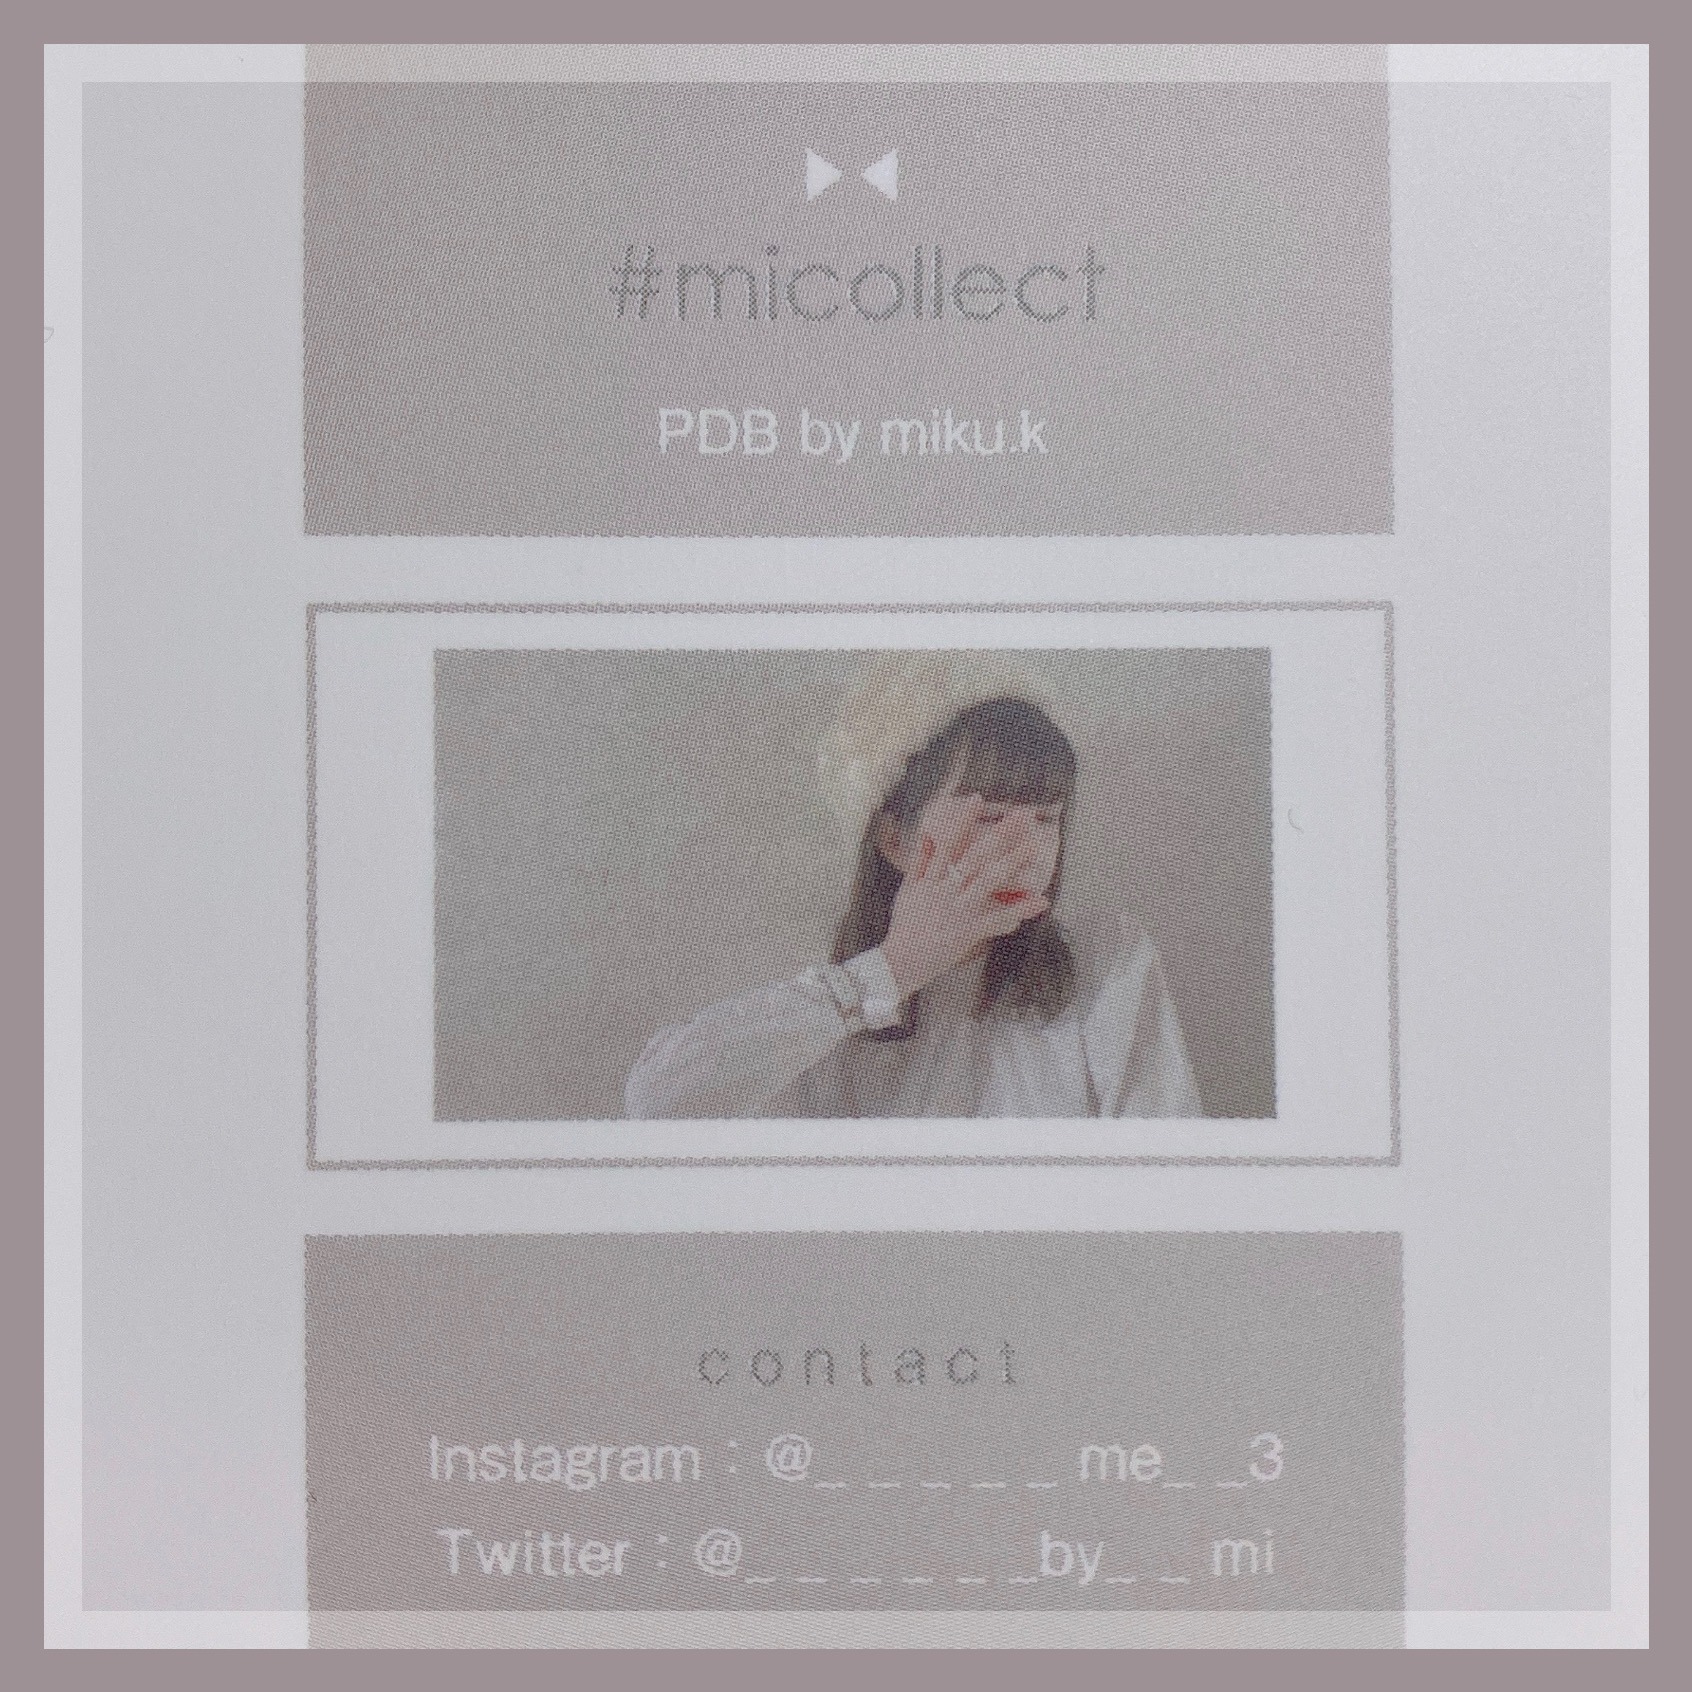 ＃micollect